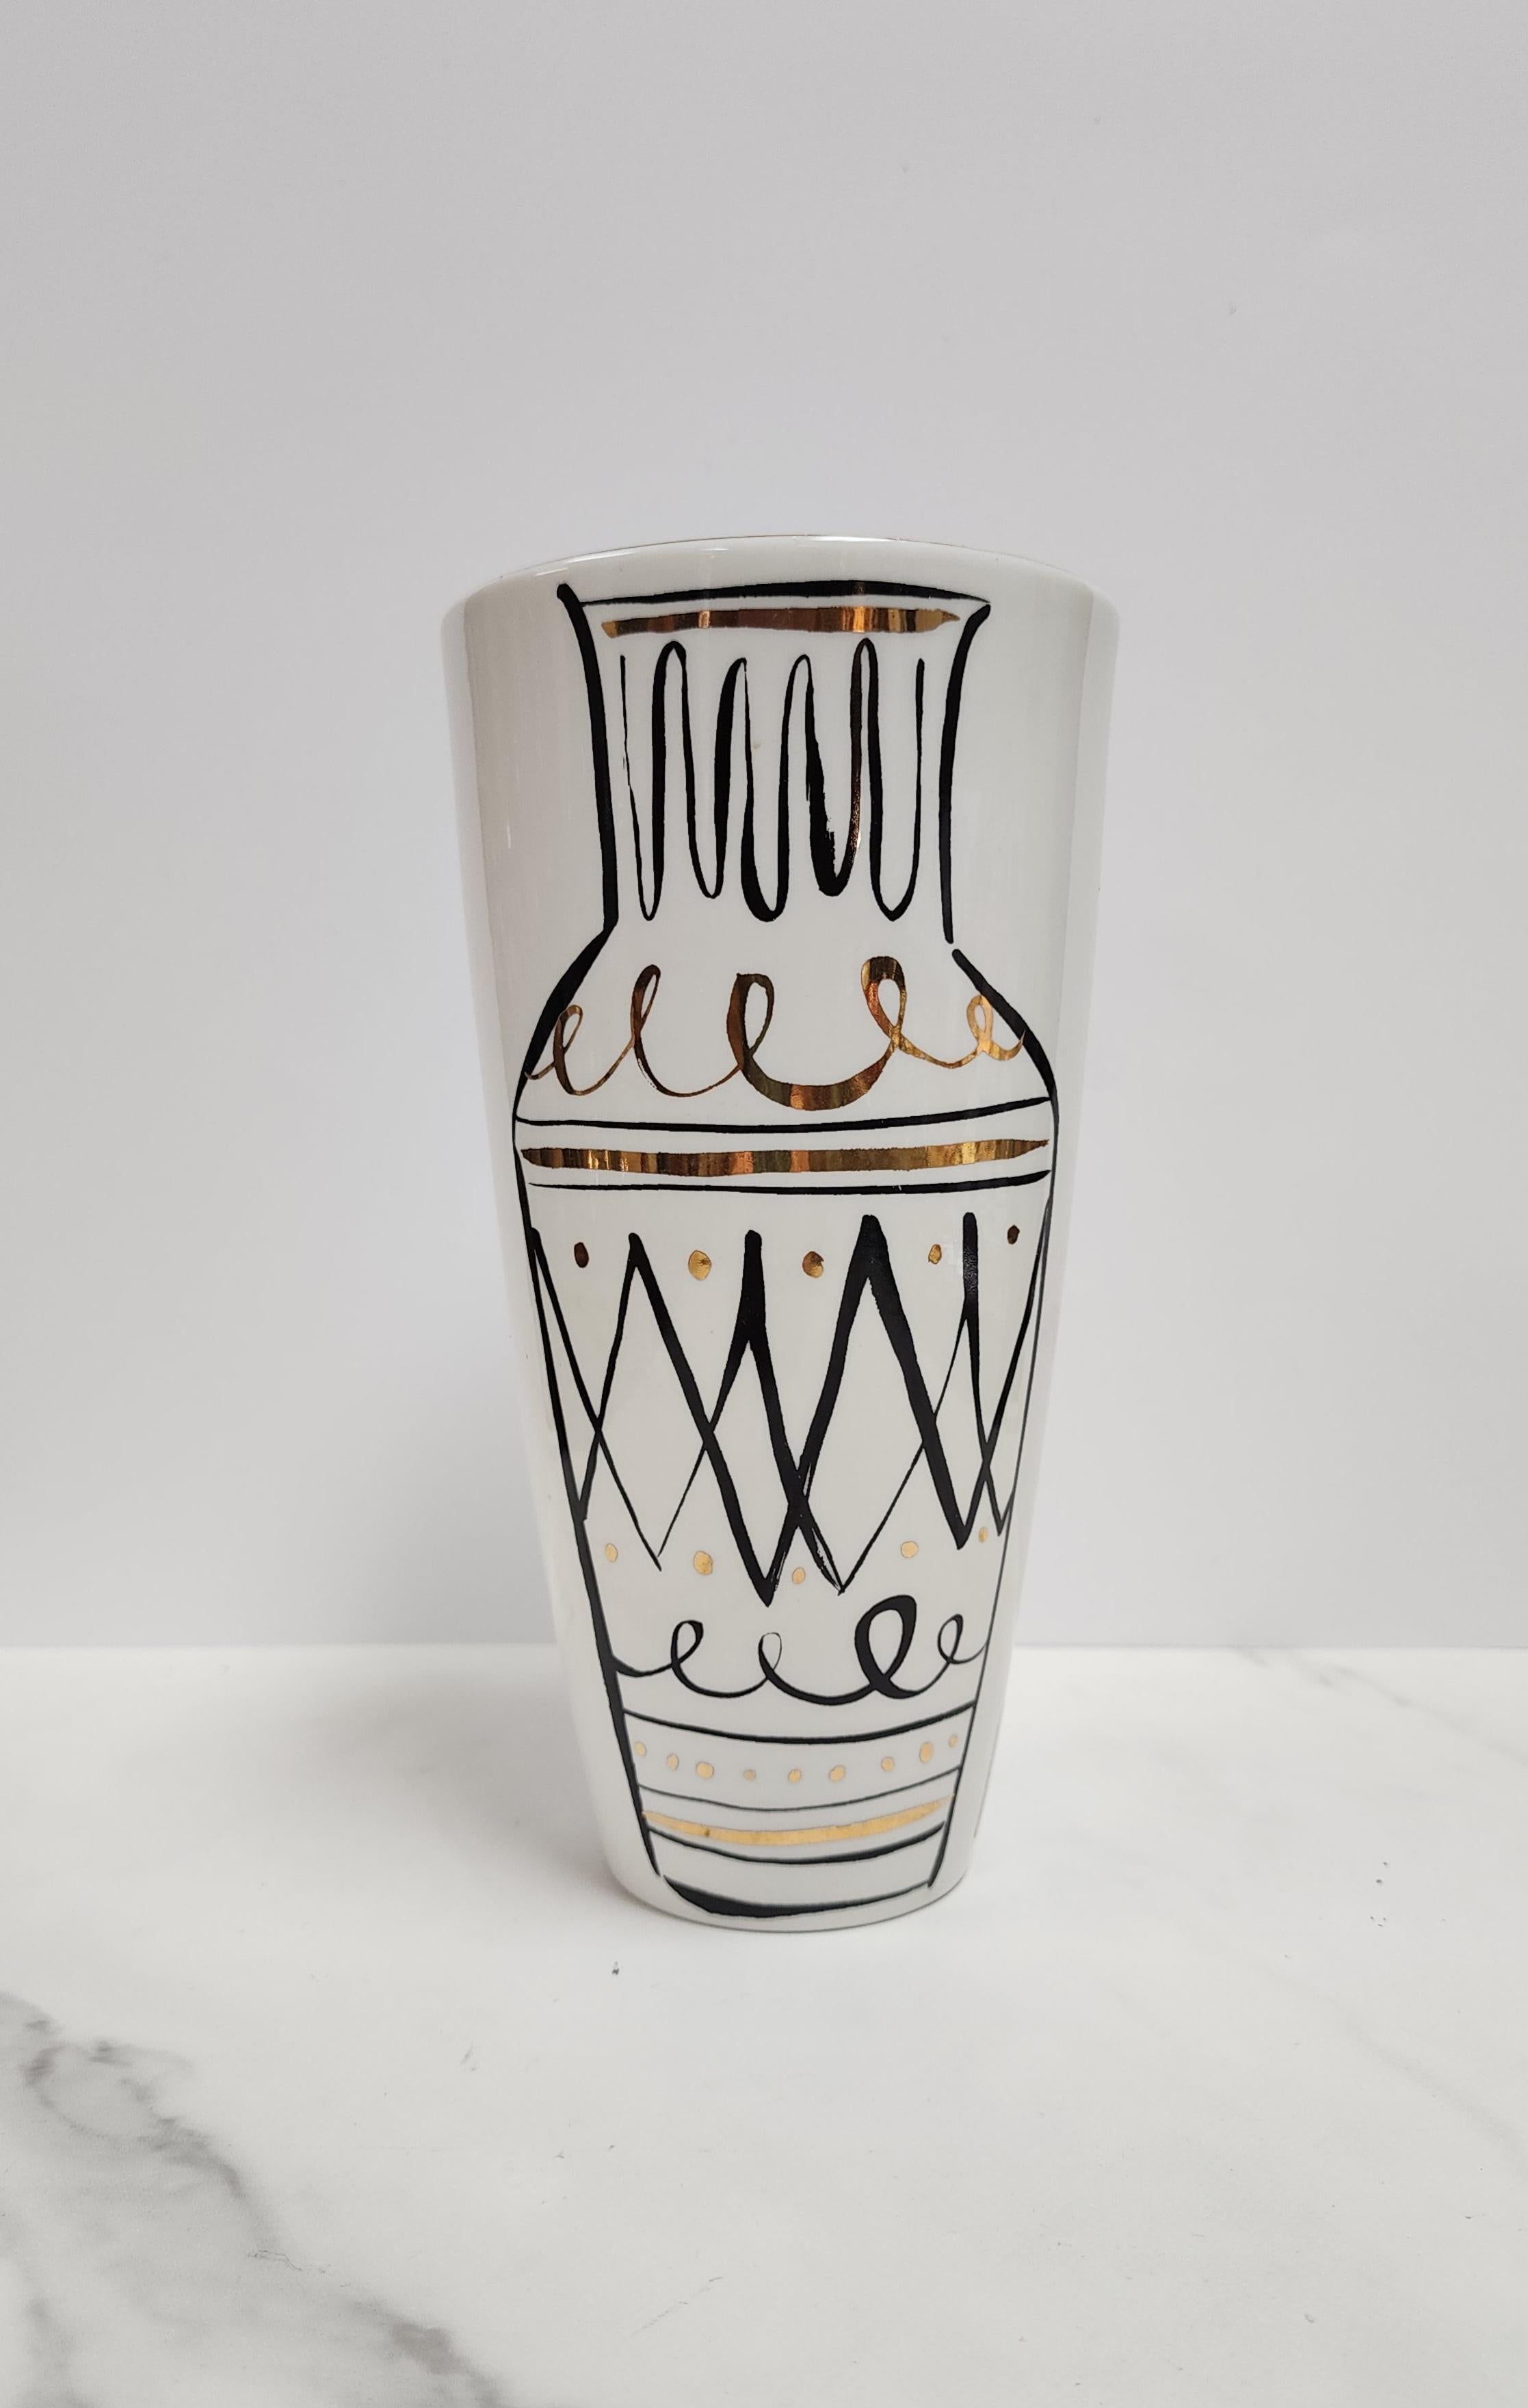 This ivory and gold Lenox vase is from the collaboration with Kate Spade marked Daisy Place Kate Spade New York. The scrafitto style art of a vase within a vase is whimsical with a nod to classic Italian pottery. In excellent condition. 